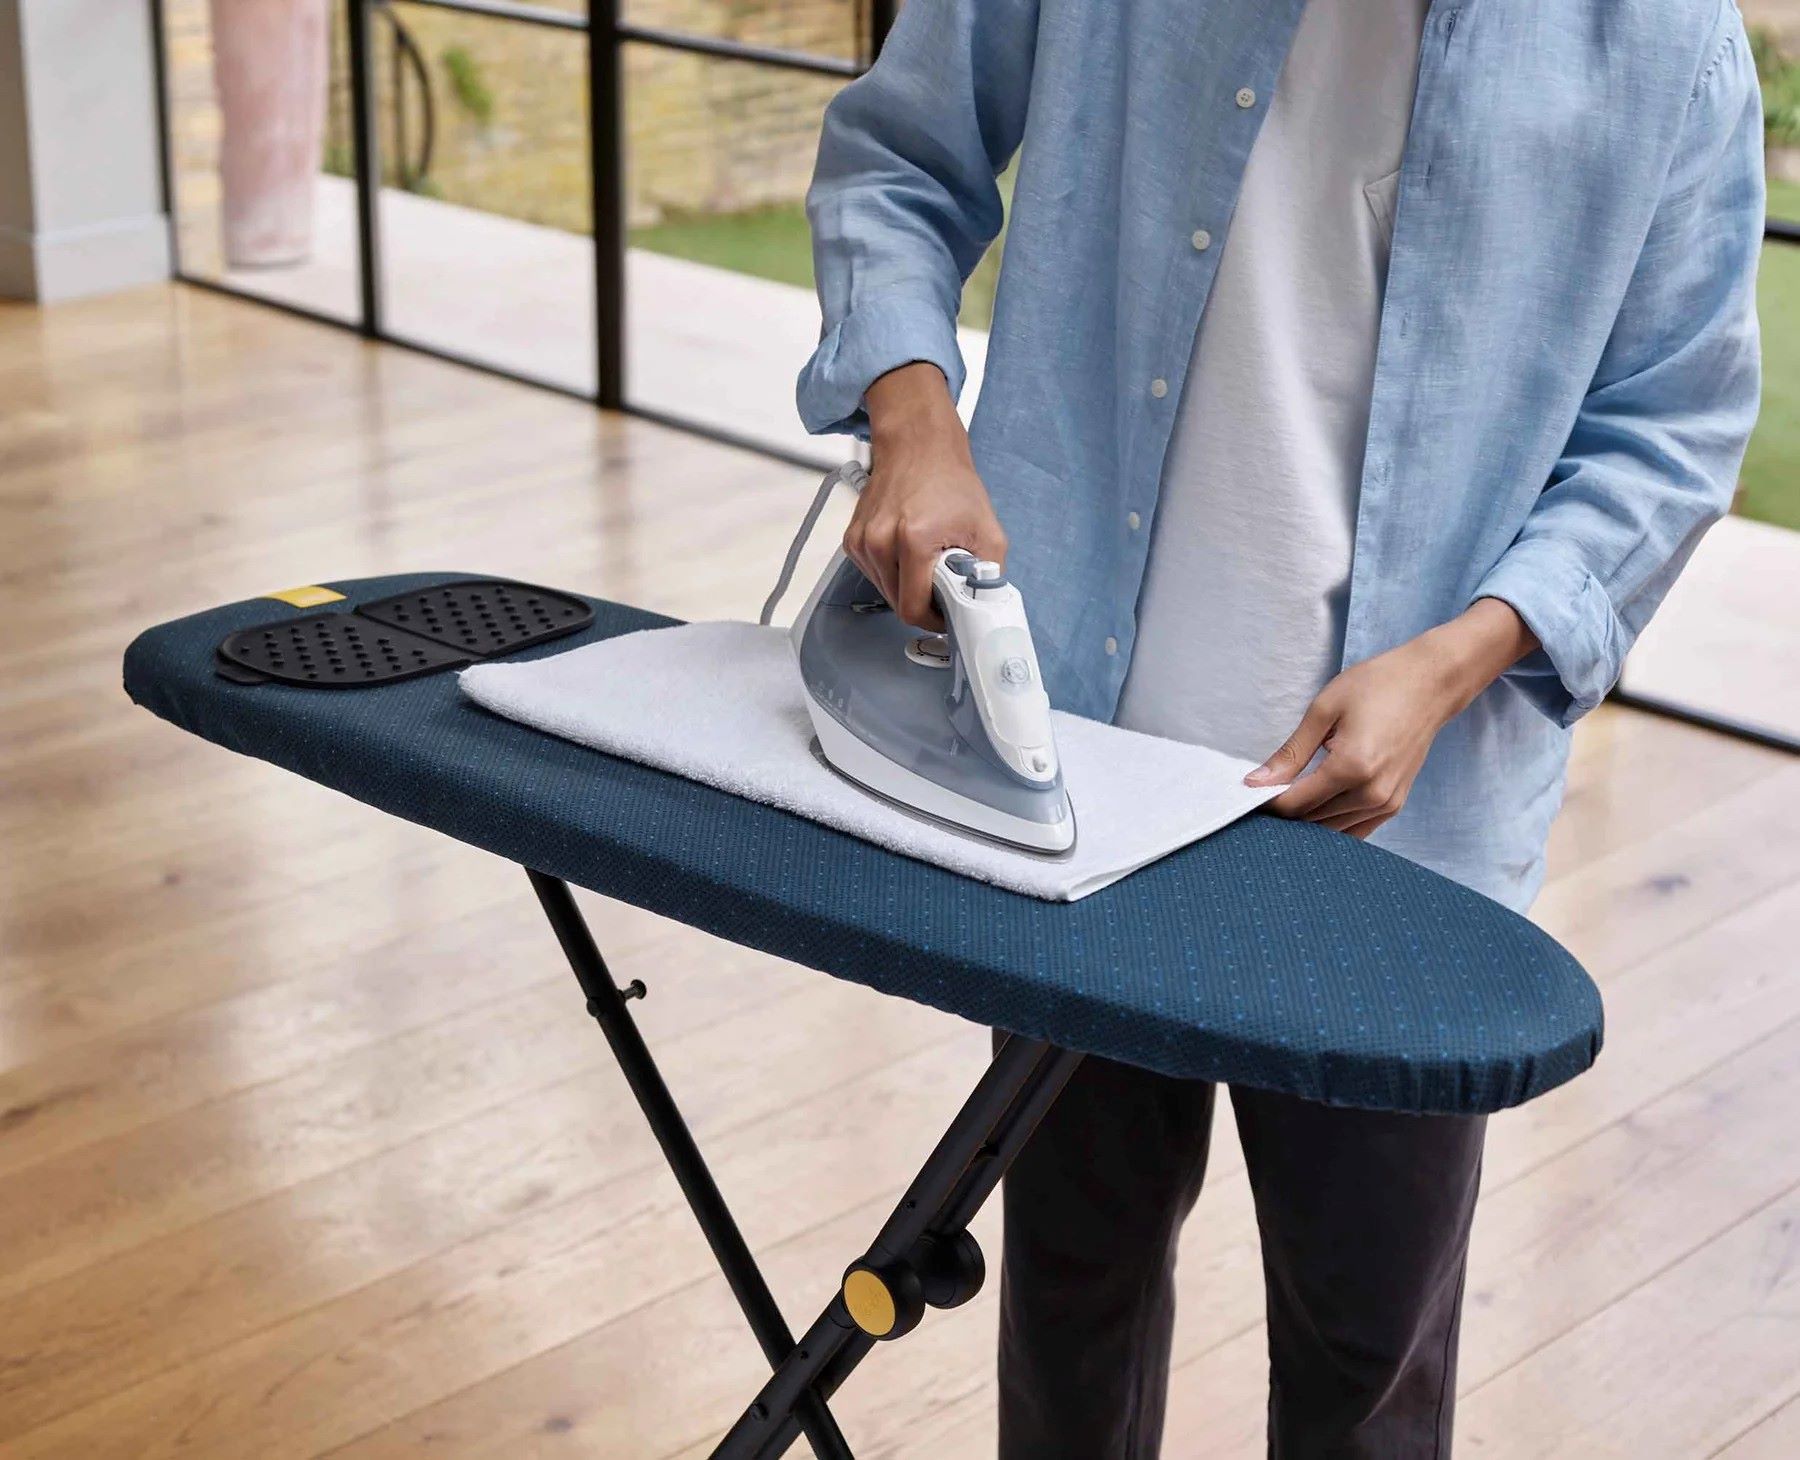 Who Invented The Ironing Board?